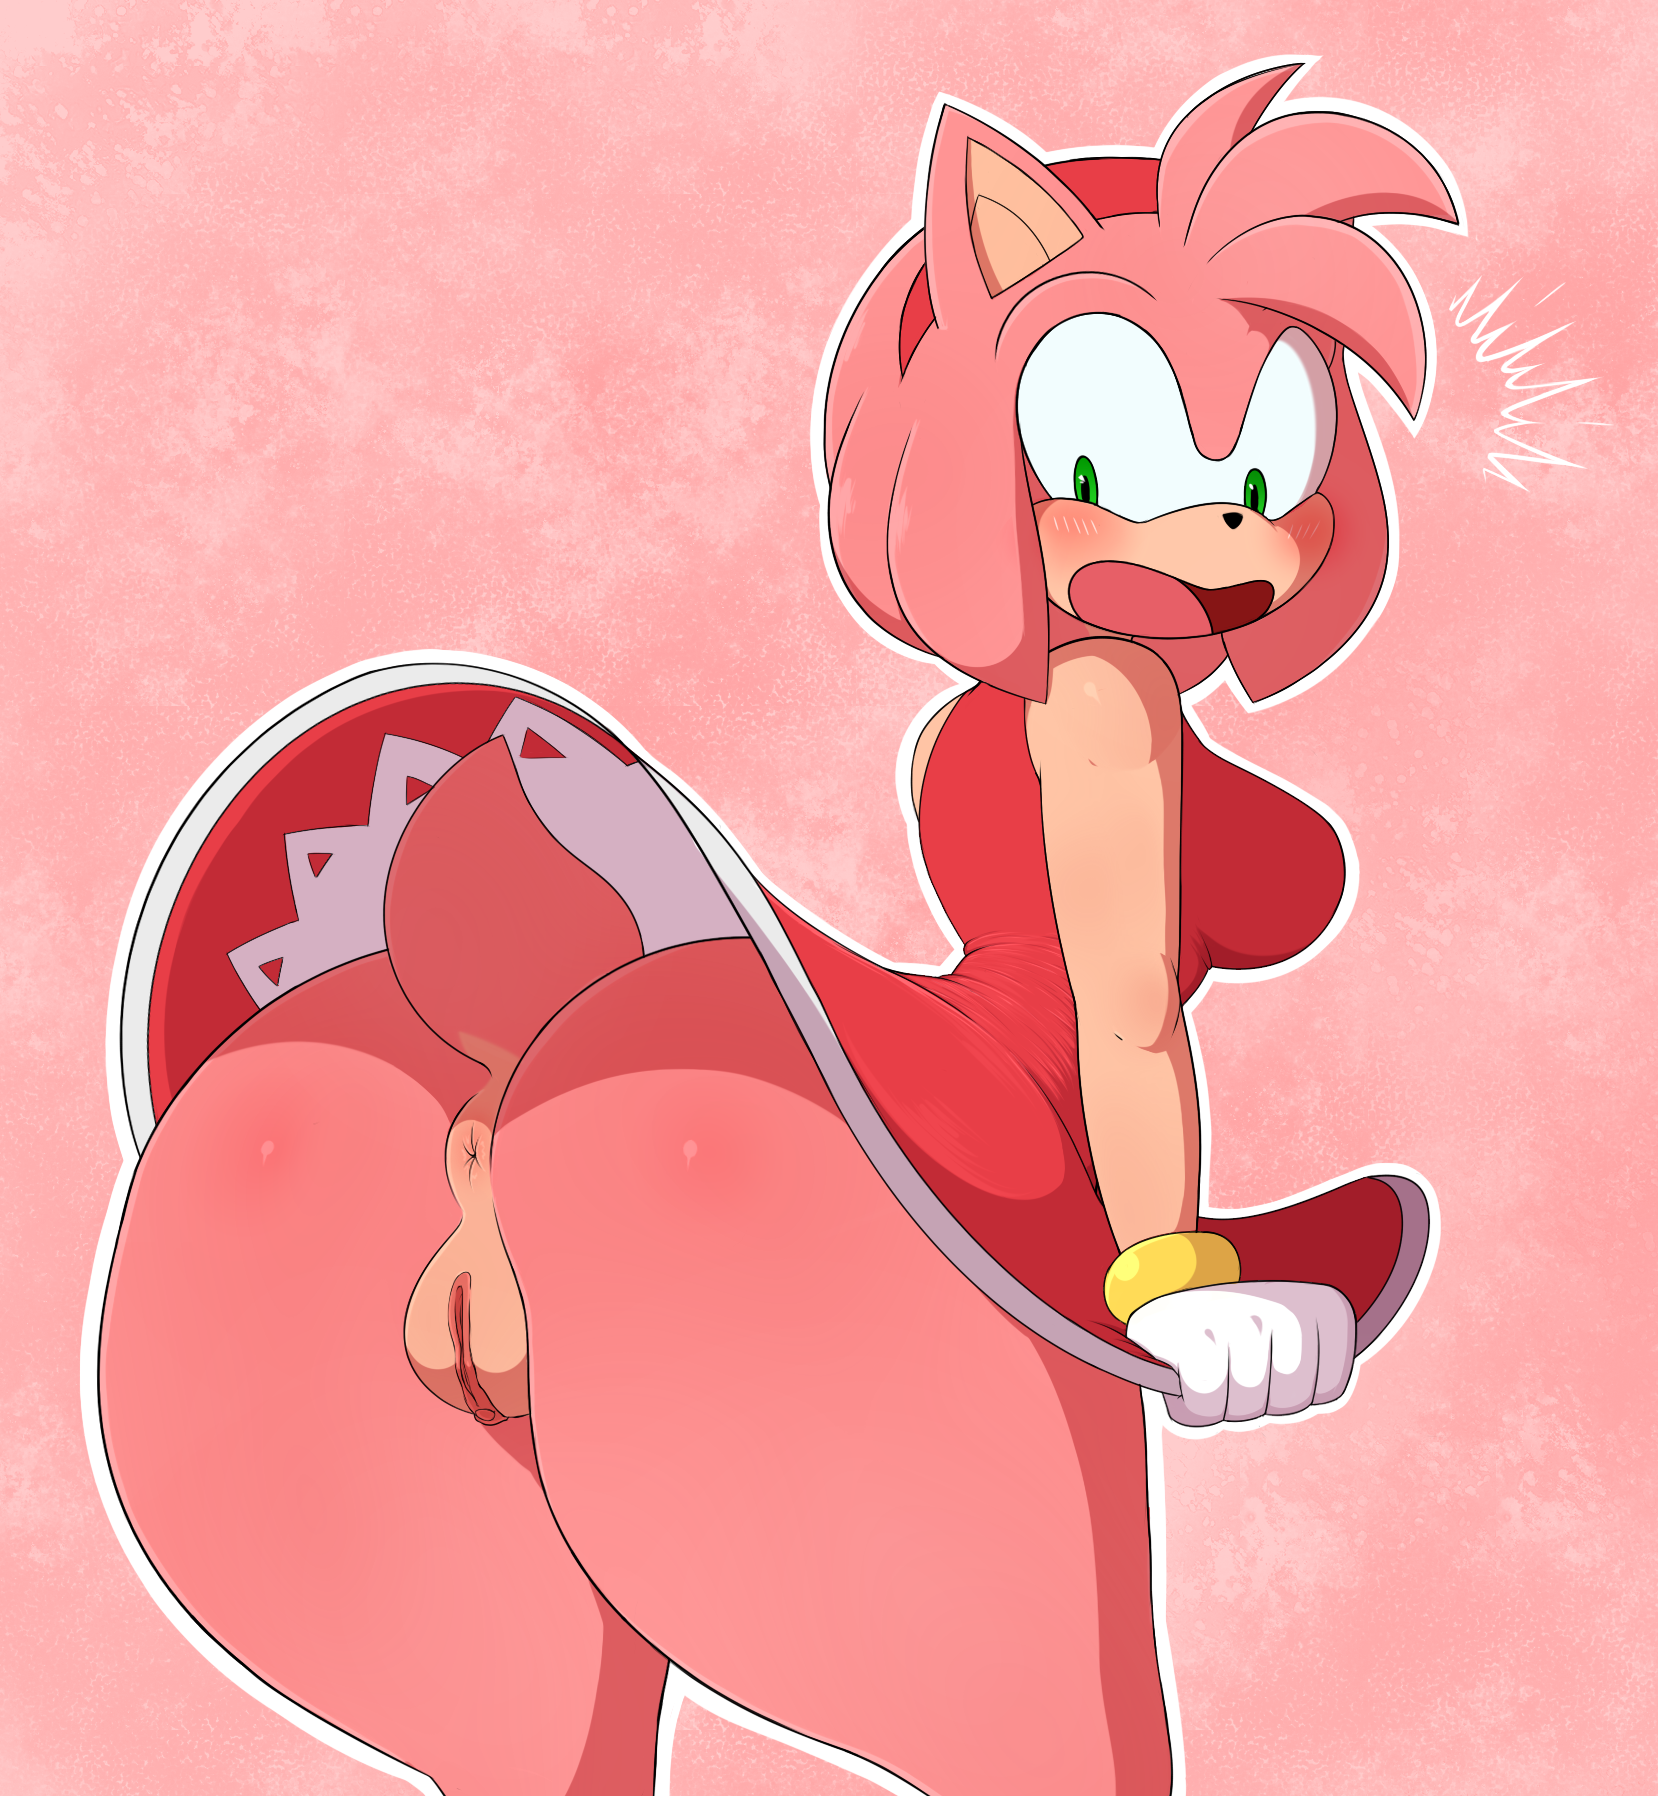 Amy Rose Porn Upskirt Panties - Rule34 - If it exists, there is porn of it / adma228, admansfwstuff, amy  rose / 2306410